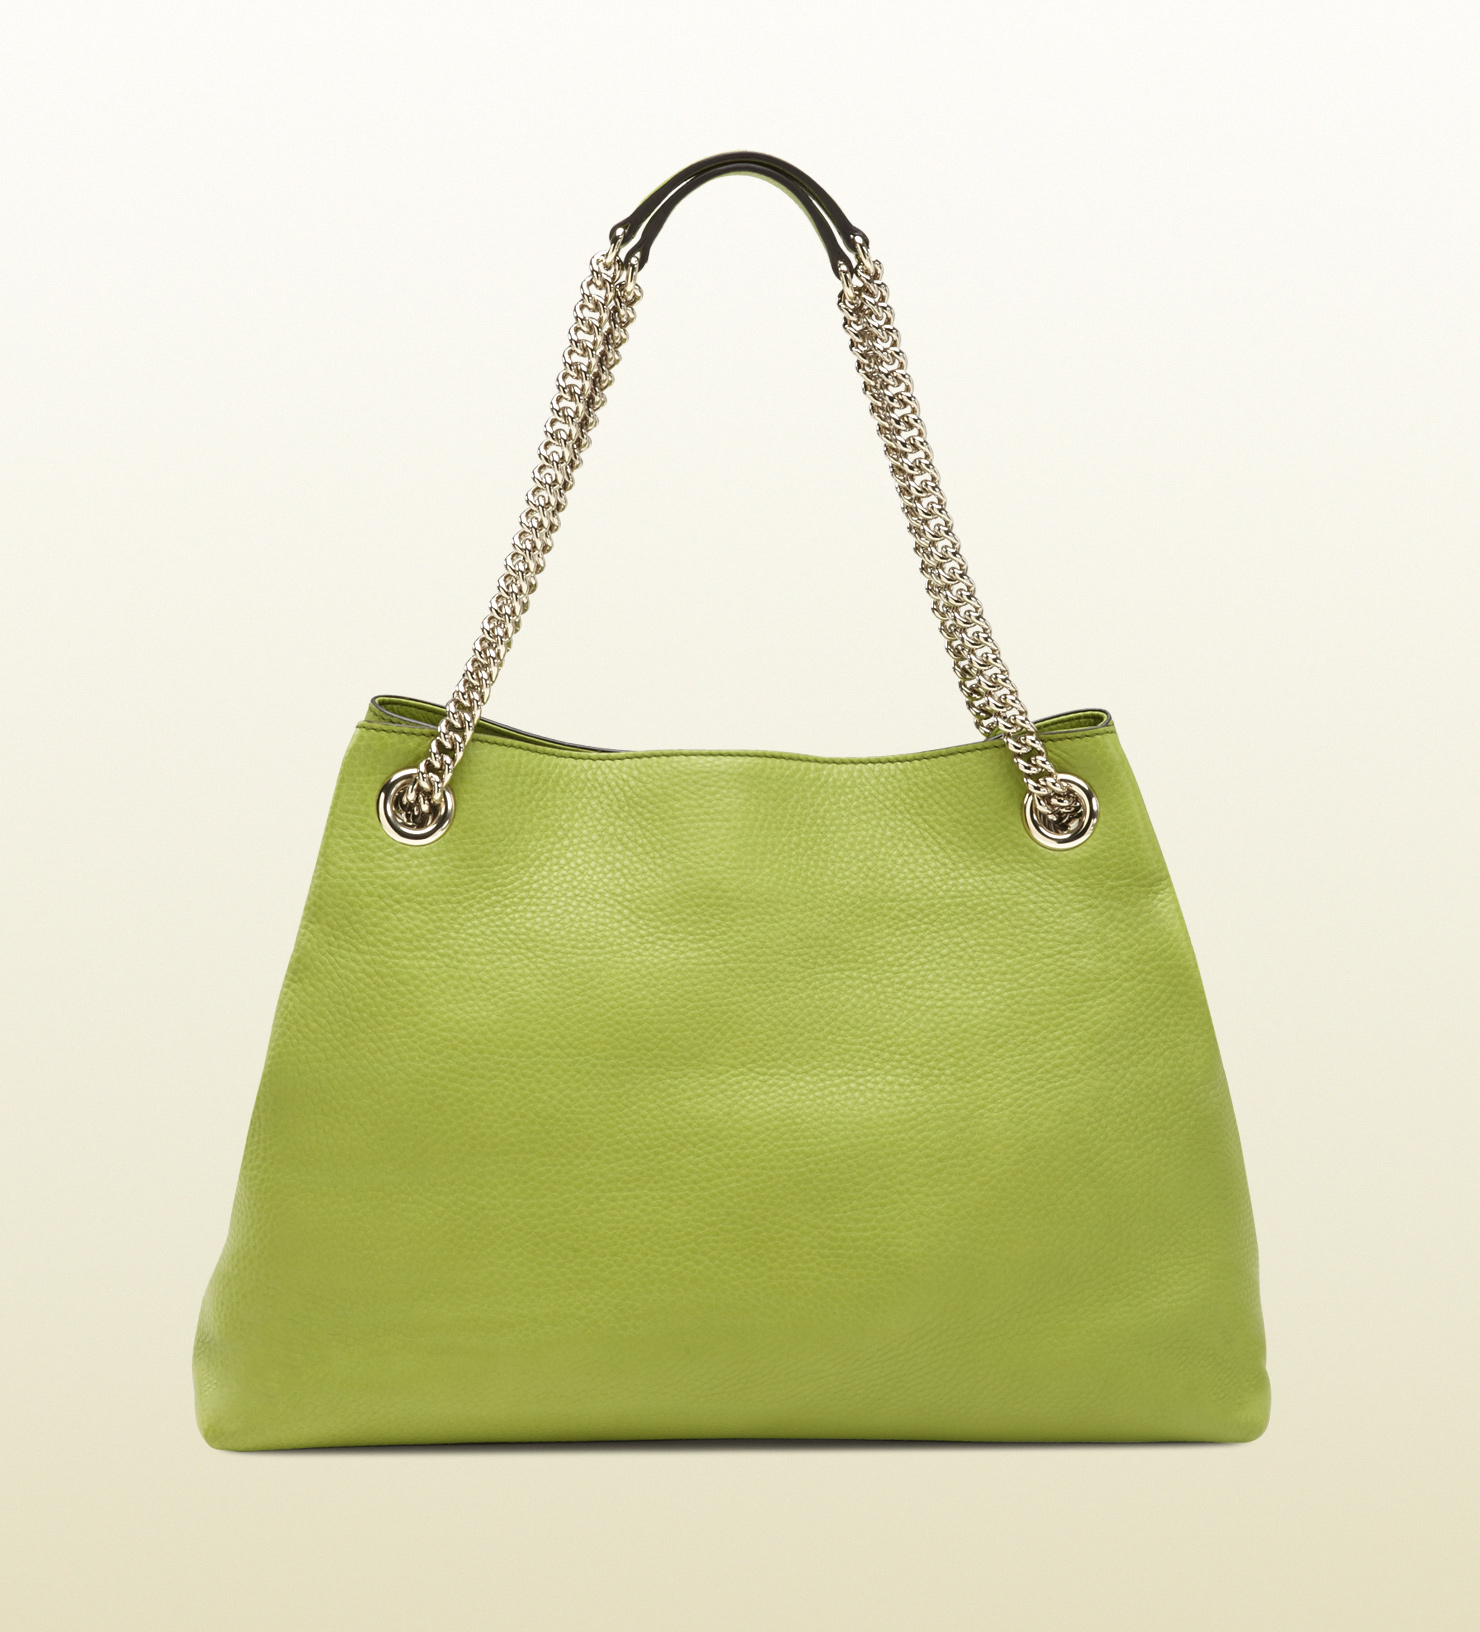 Gucci Soho Apple Green Leather Shoulder Bag in Green | Lyst